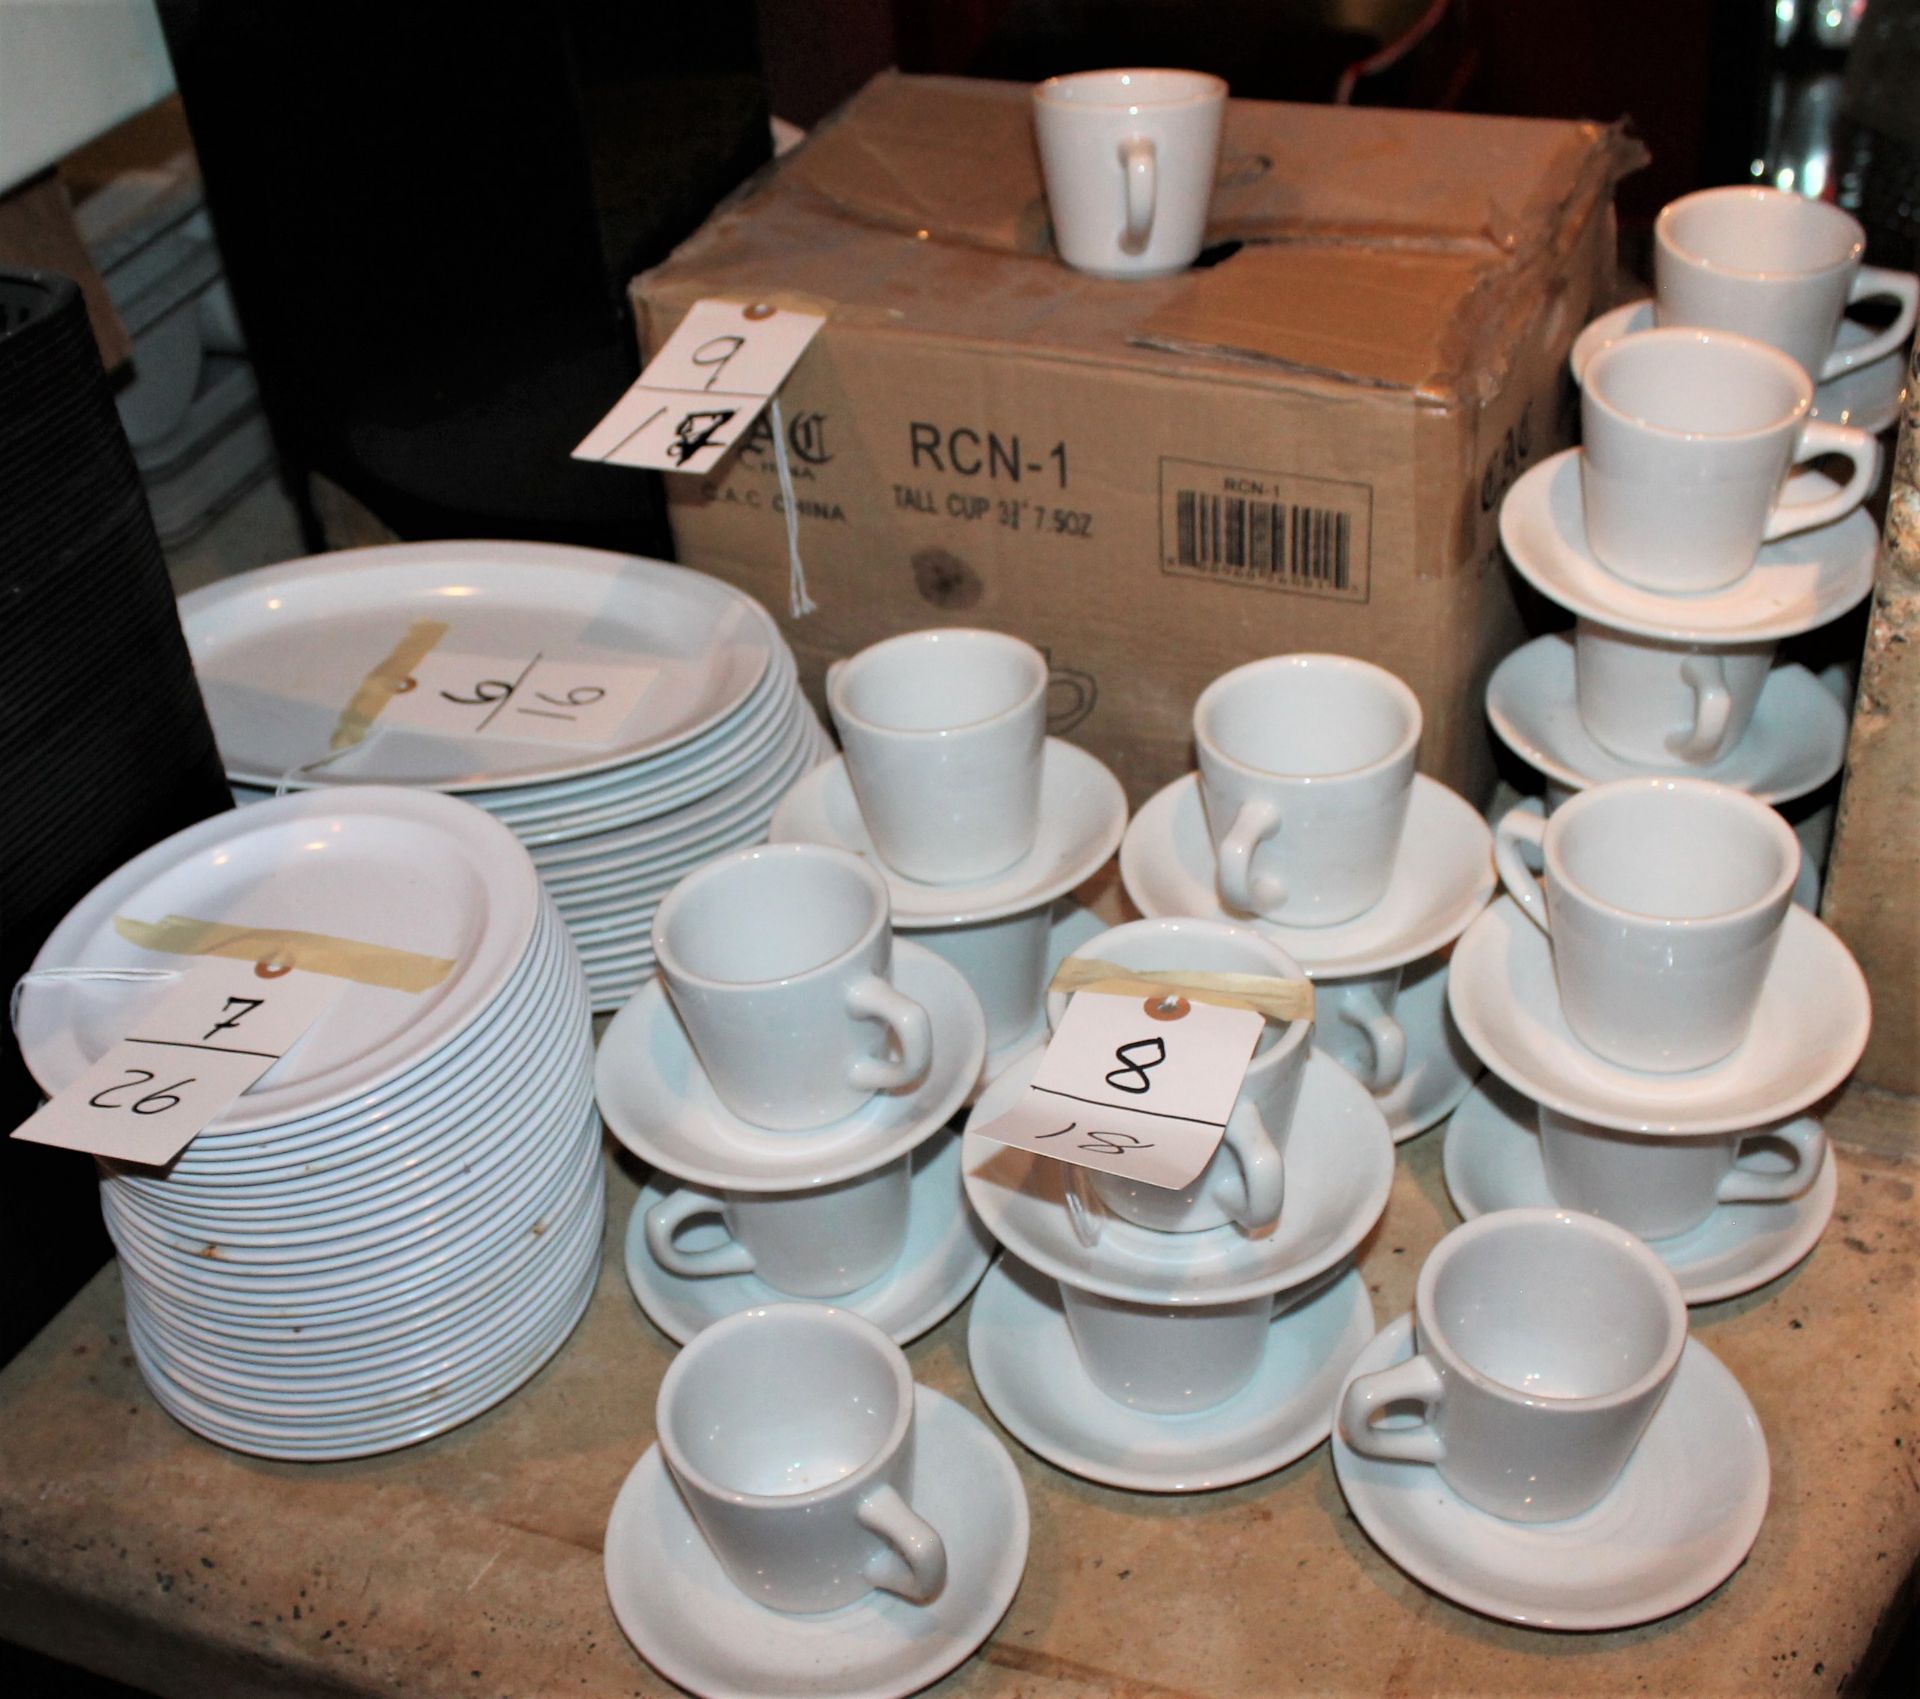 New Cups & Saucers